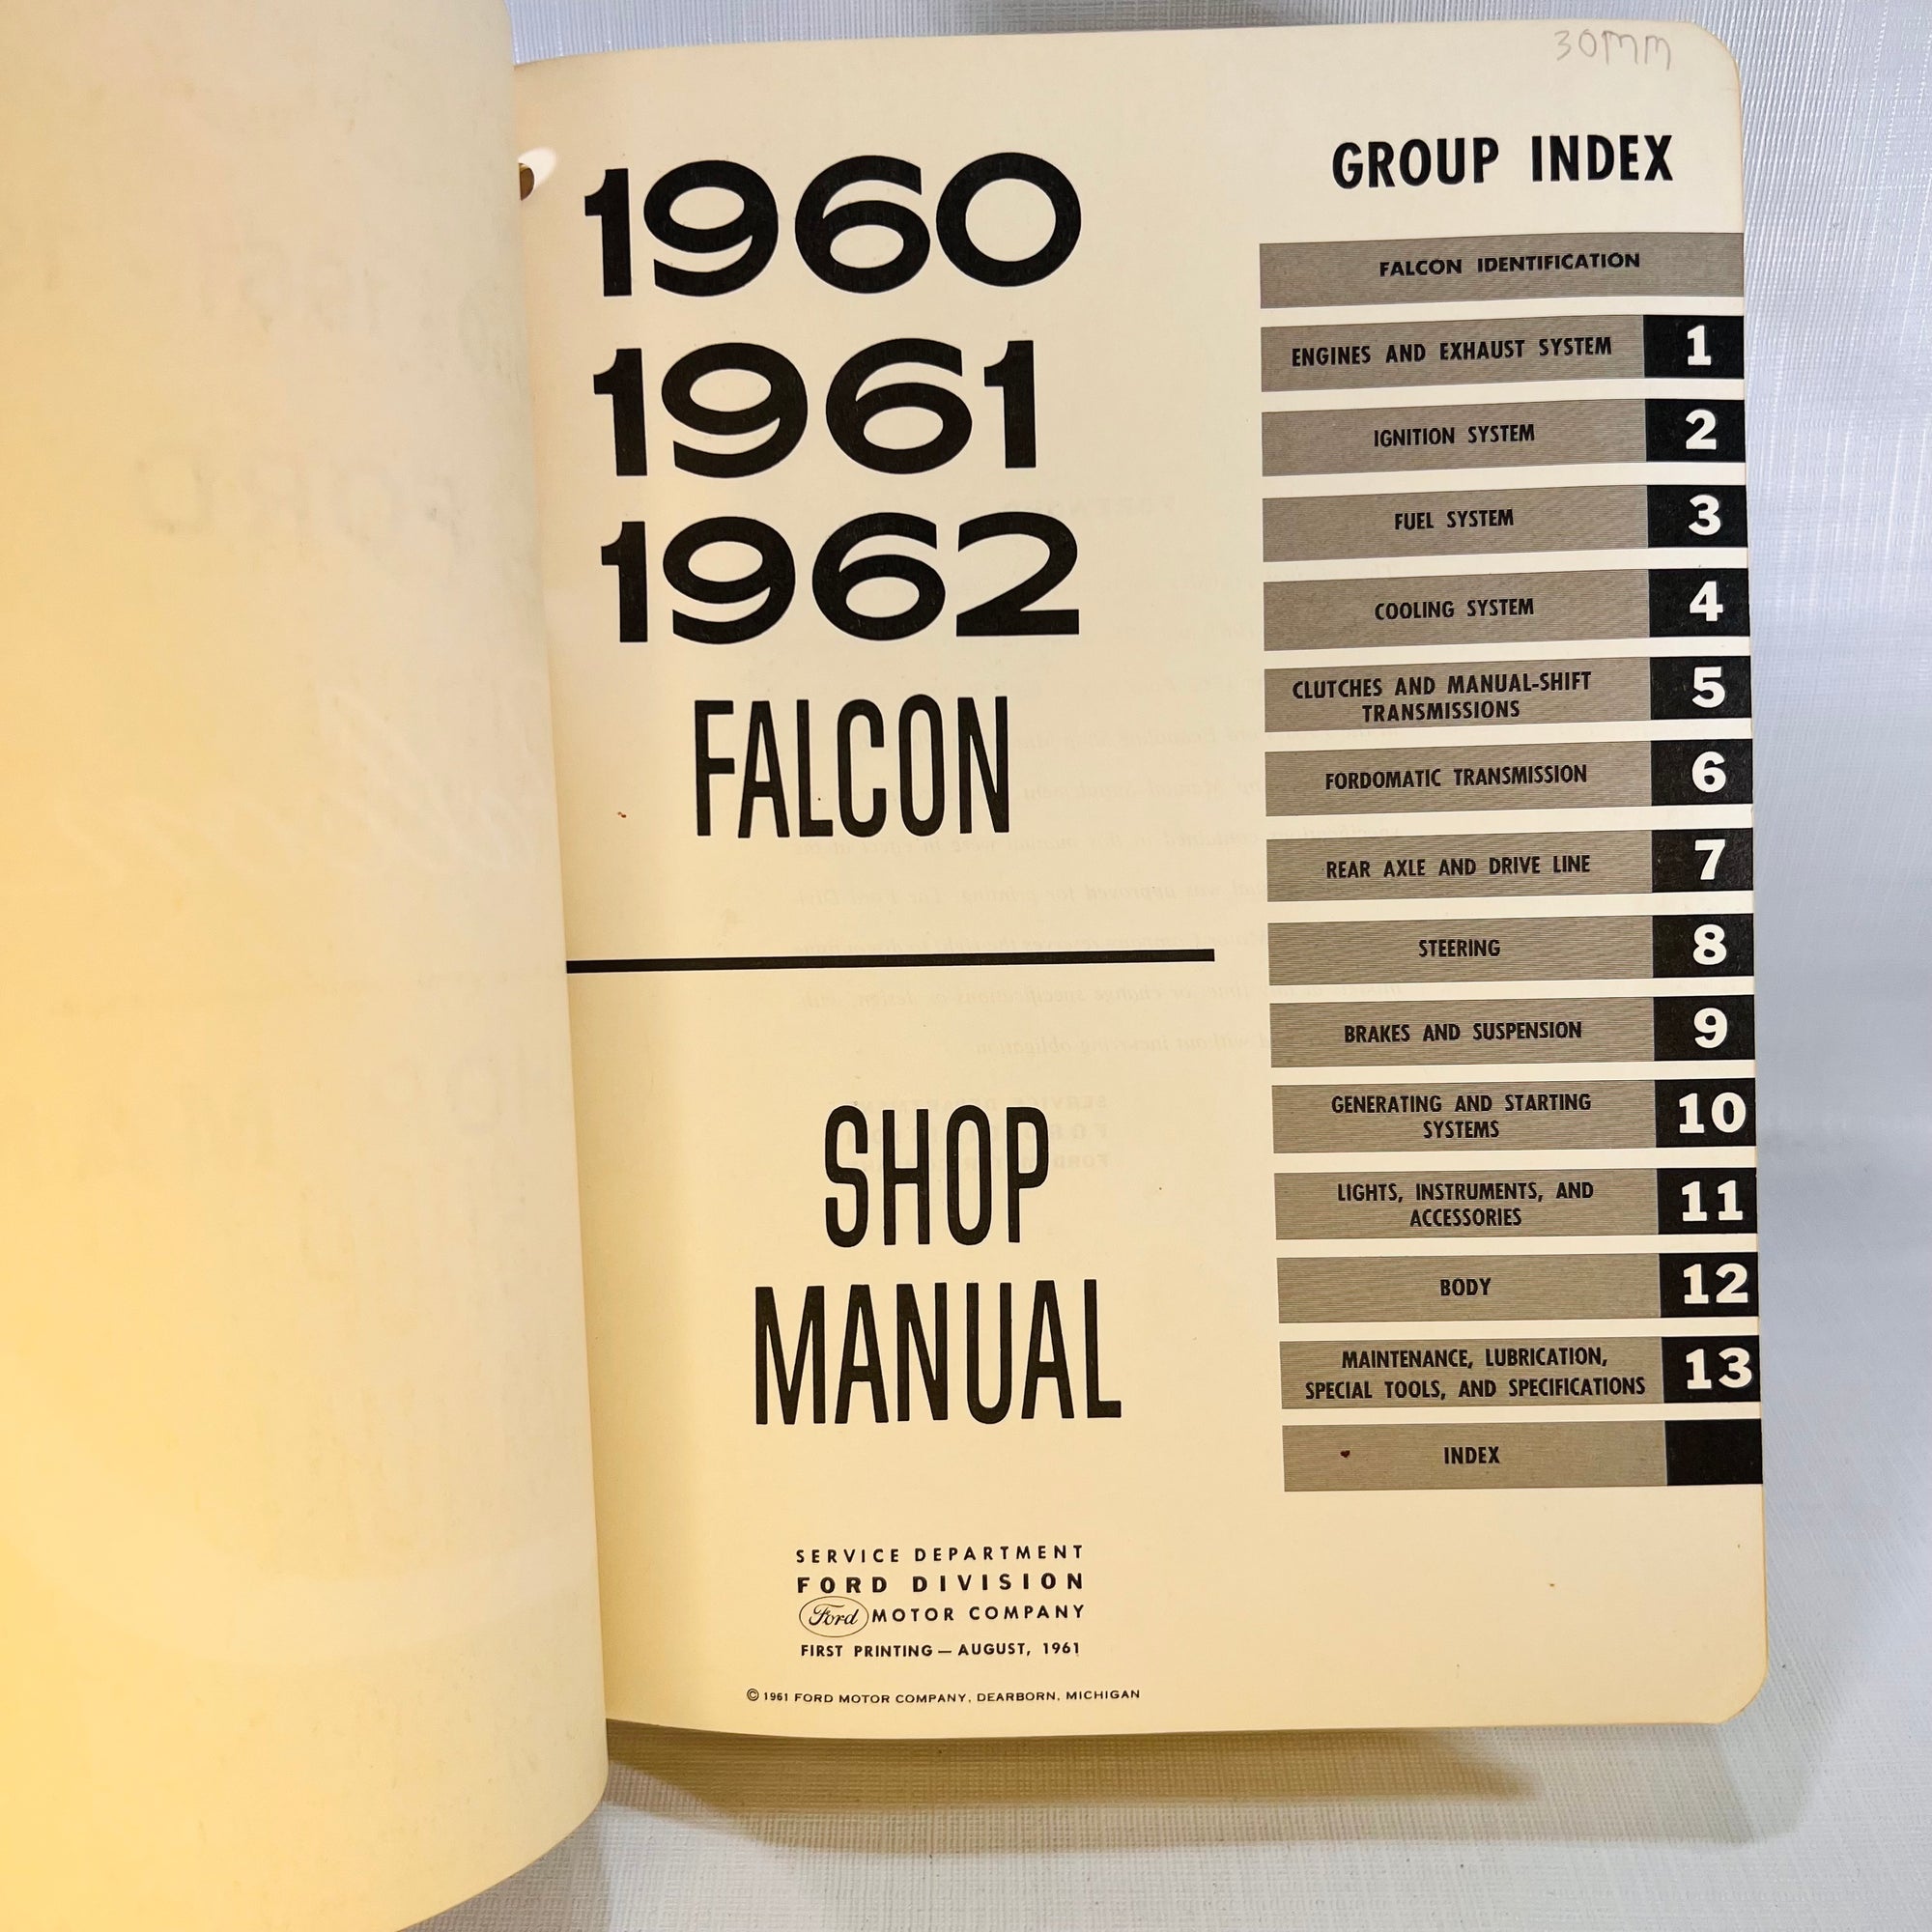 Ford Falcon Shop Manual 1960 61 62 by Service Dept of Ford Motor Co 1961